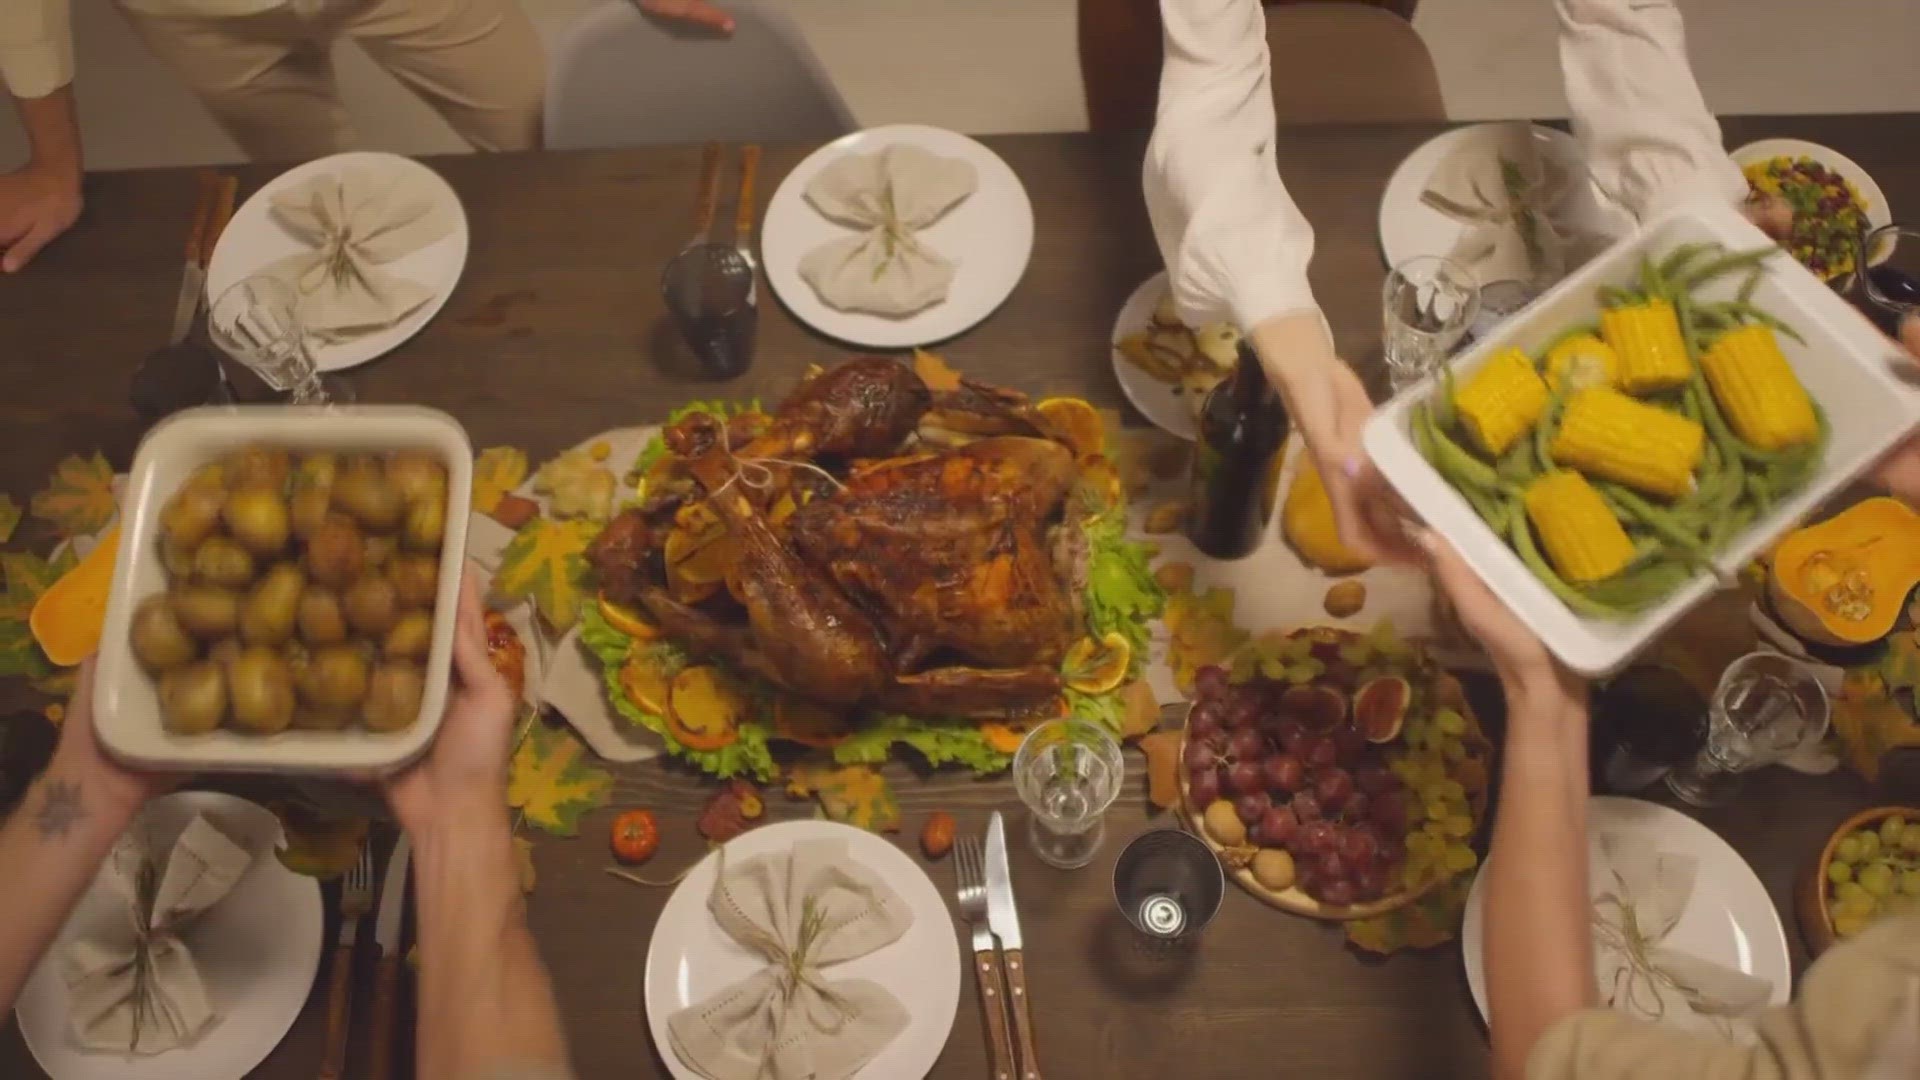 Here are some tips and tricks on how to save money this Thanksgiving.